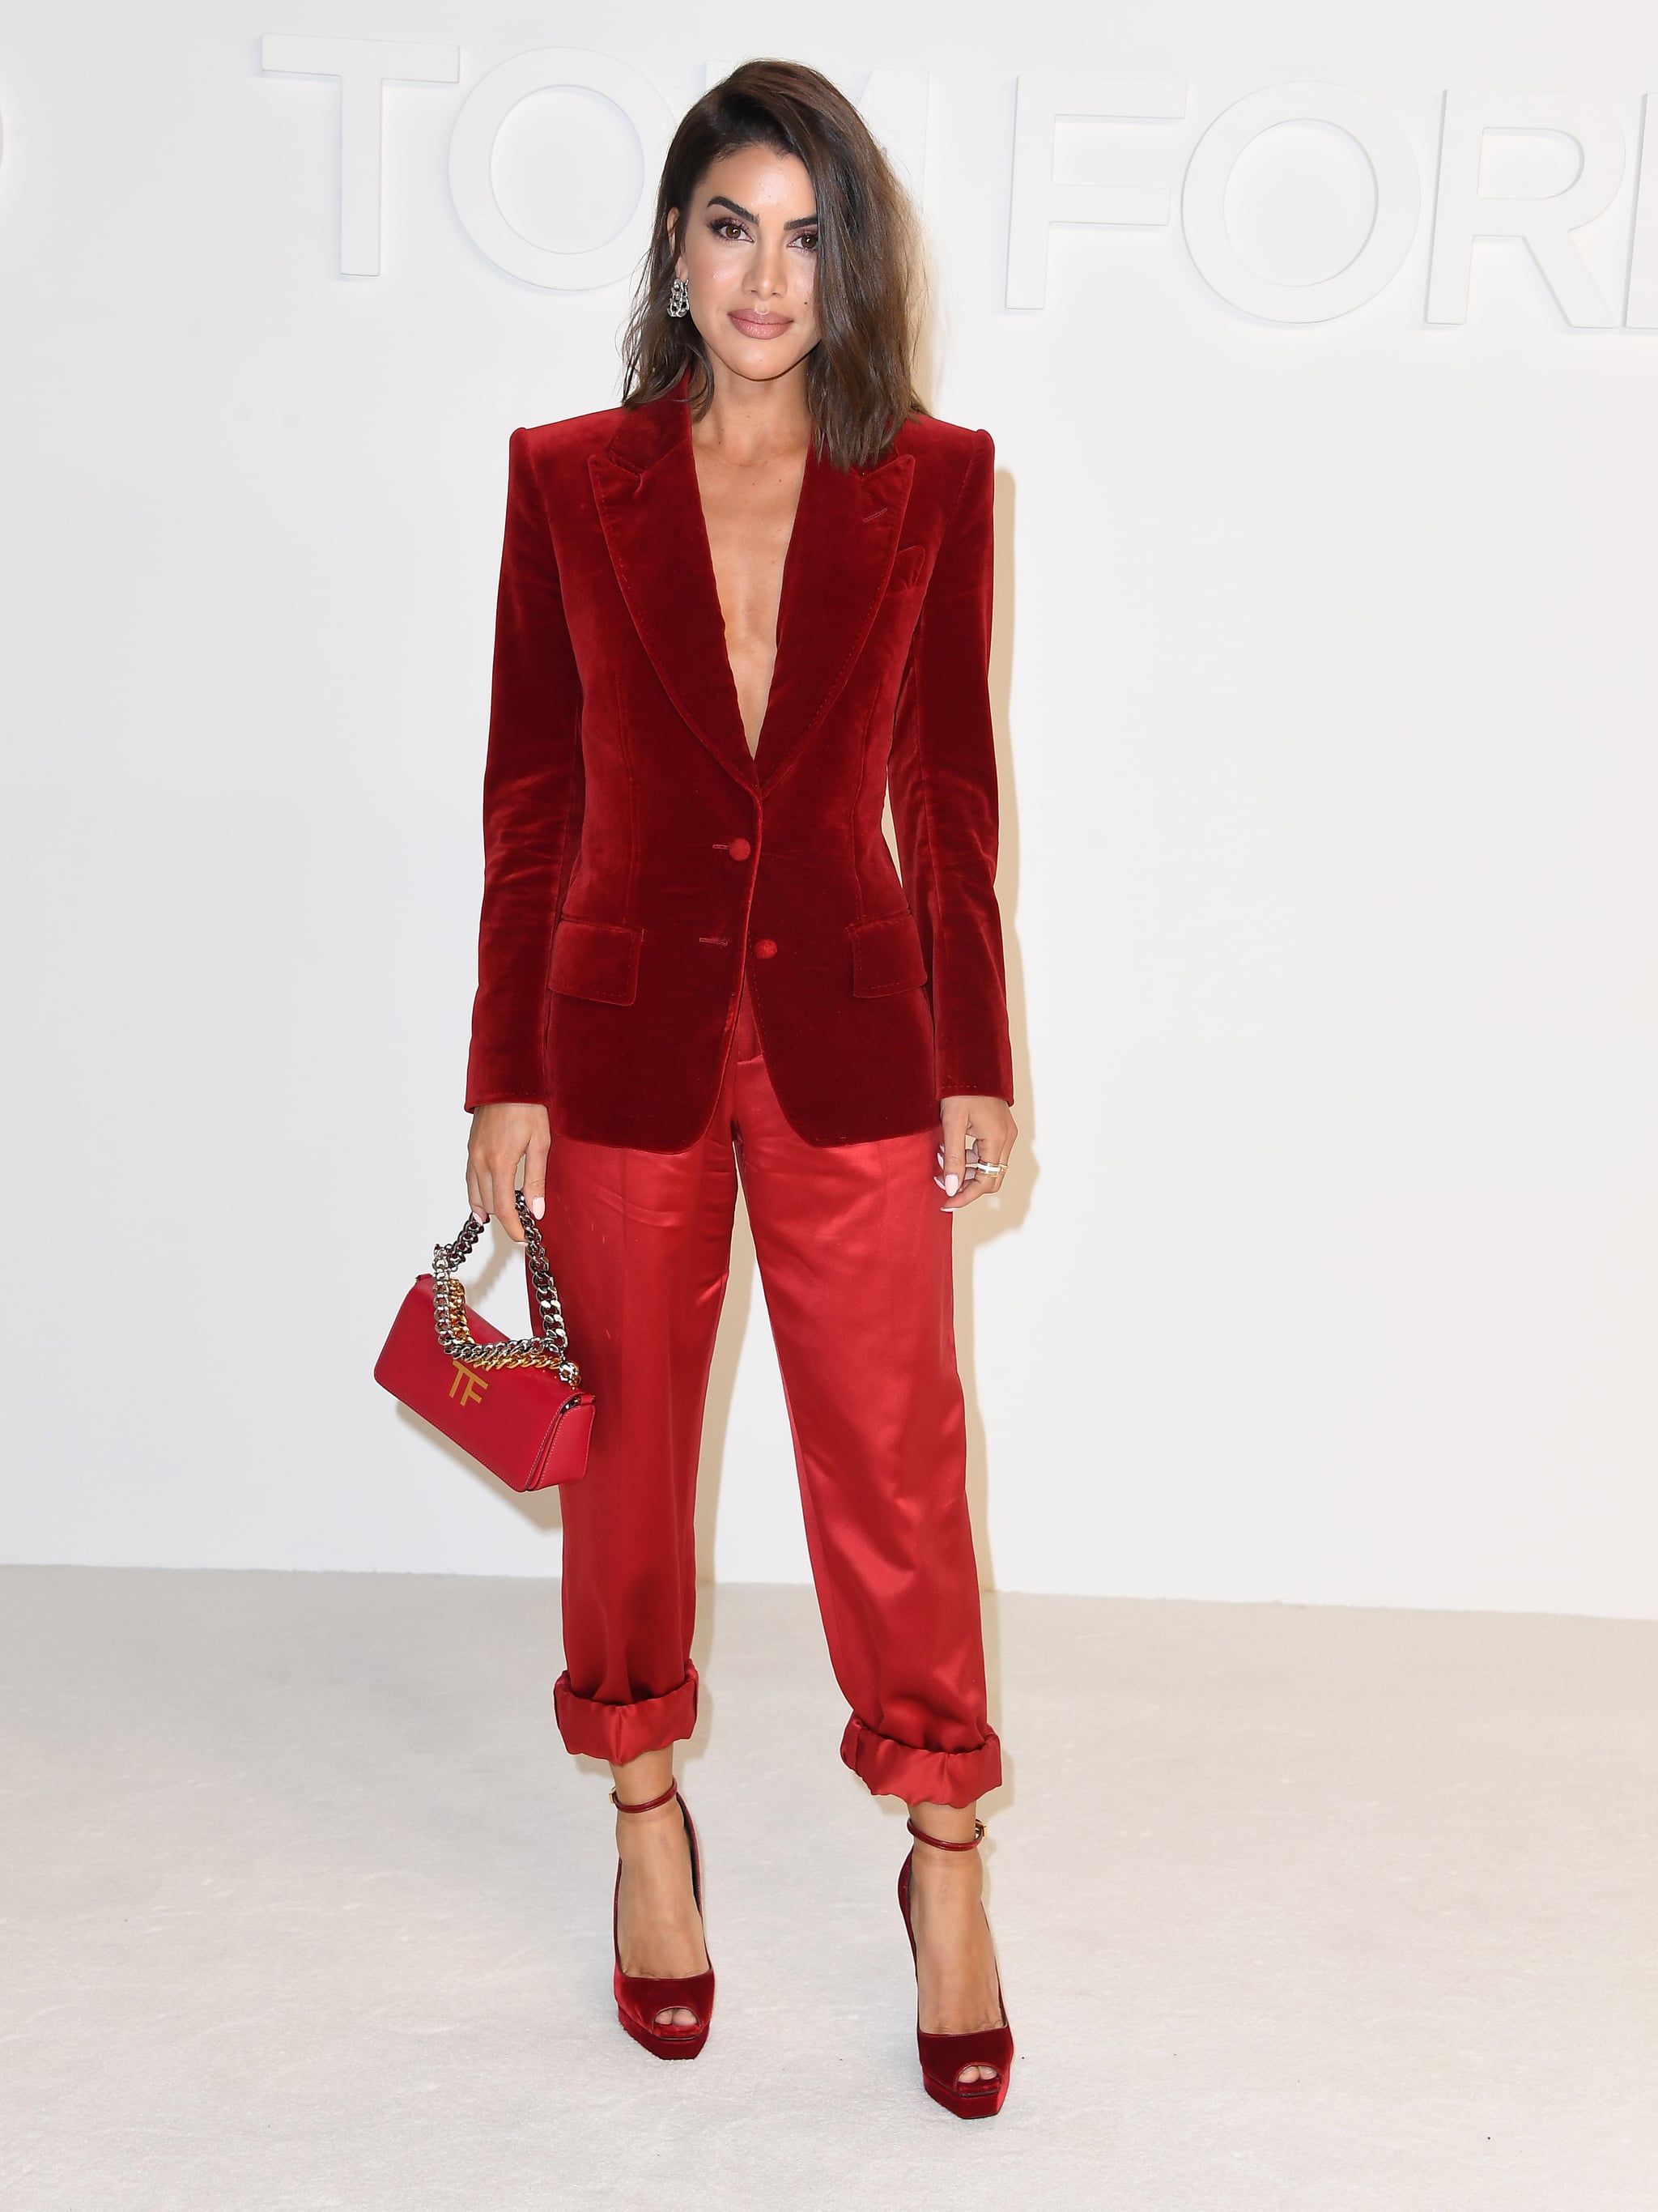 Camila Coelho at the Tom Ford Fall 2020 Show, Your Guide to What A-List  Celebrities Are Wearing to 2020's Fall Fashion Week